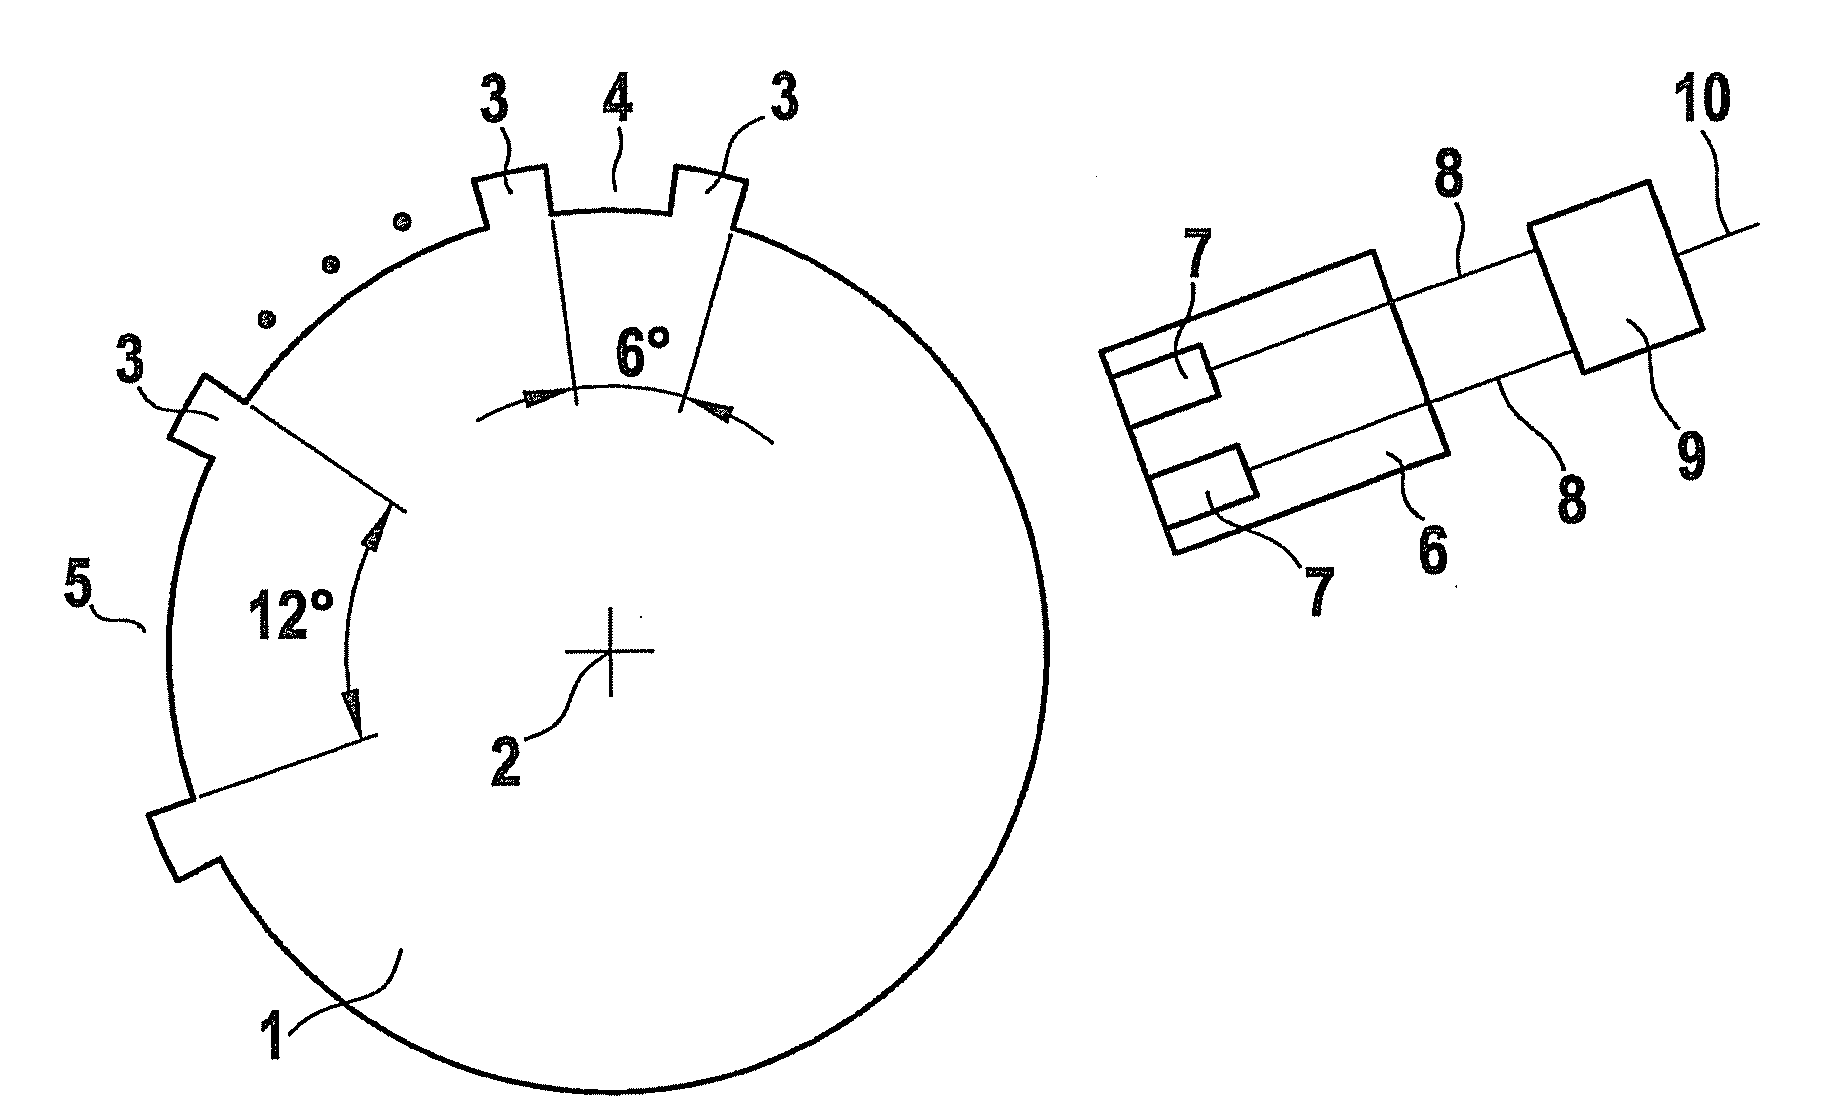 Method for incrementally ascertaining a rotation angle of a shaft